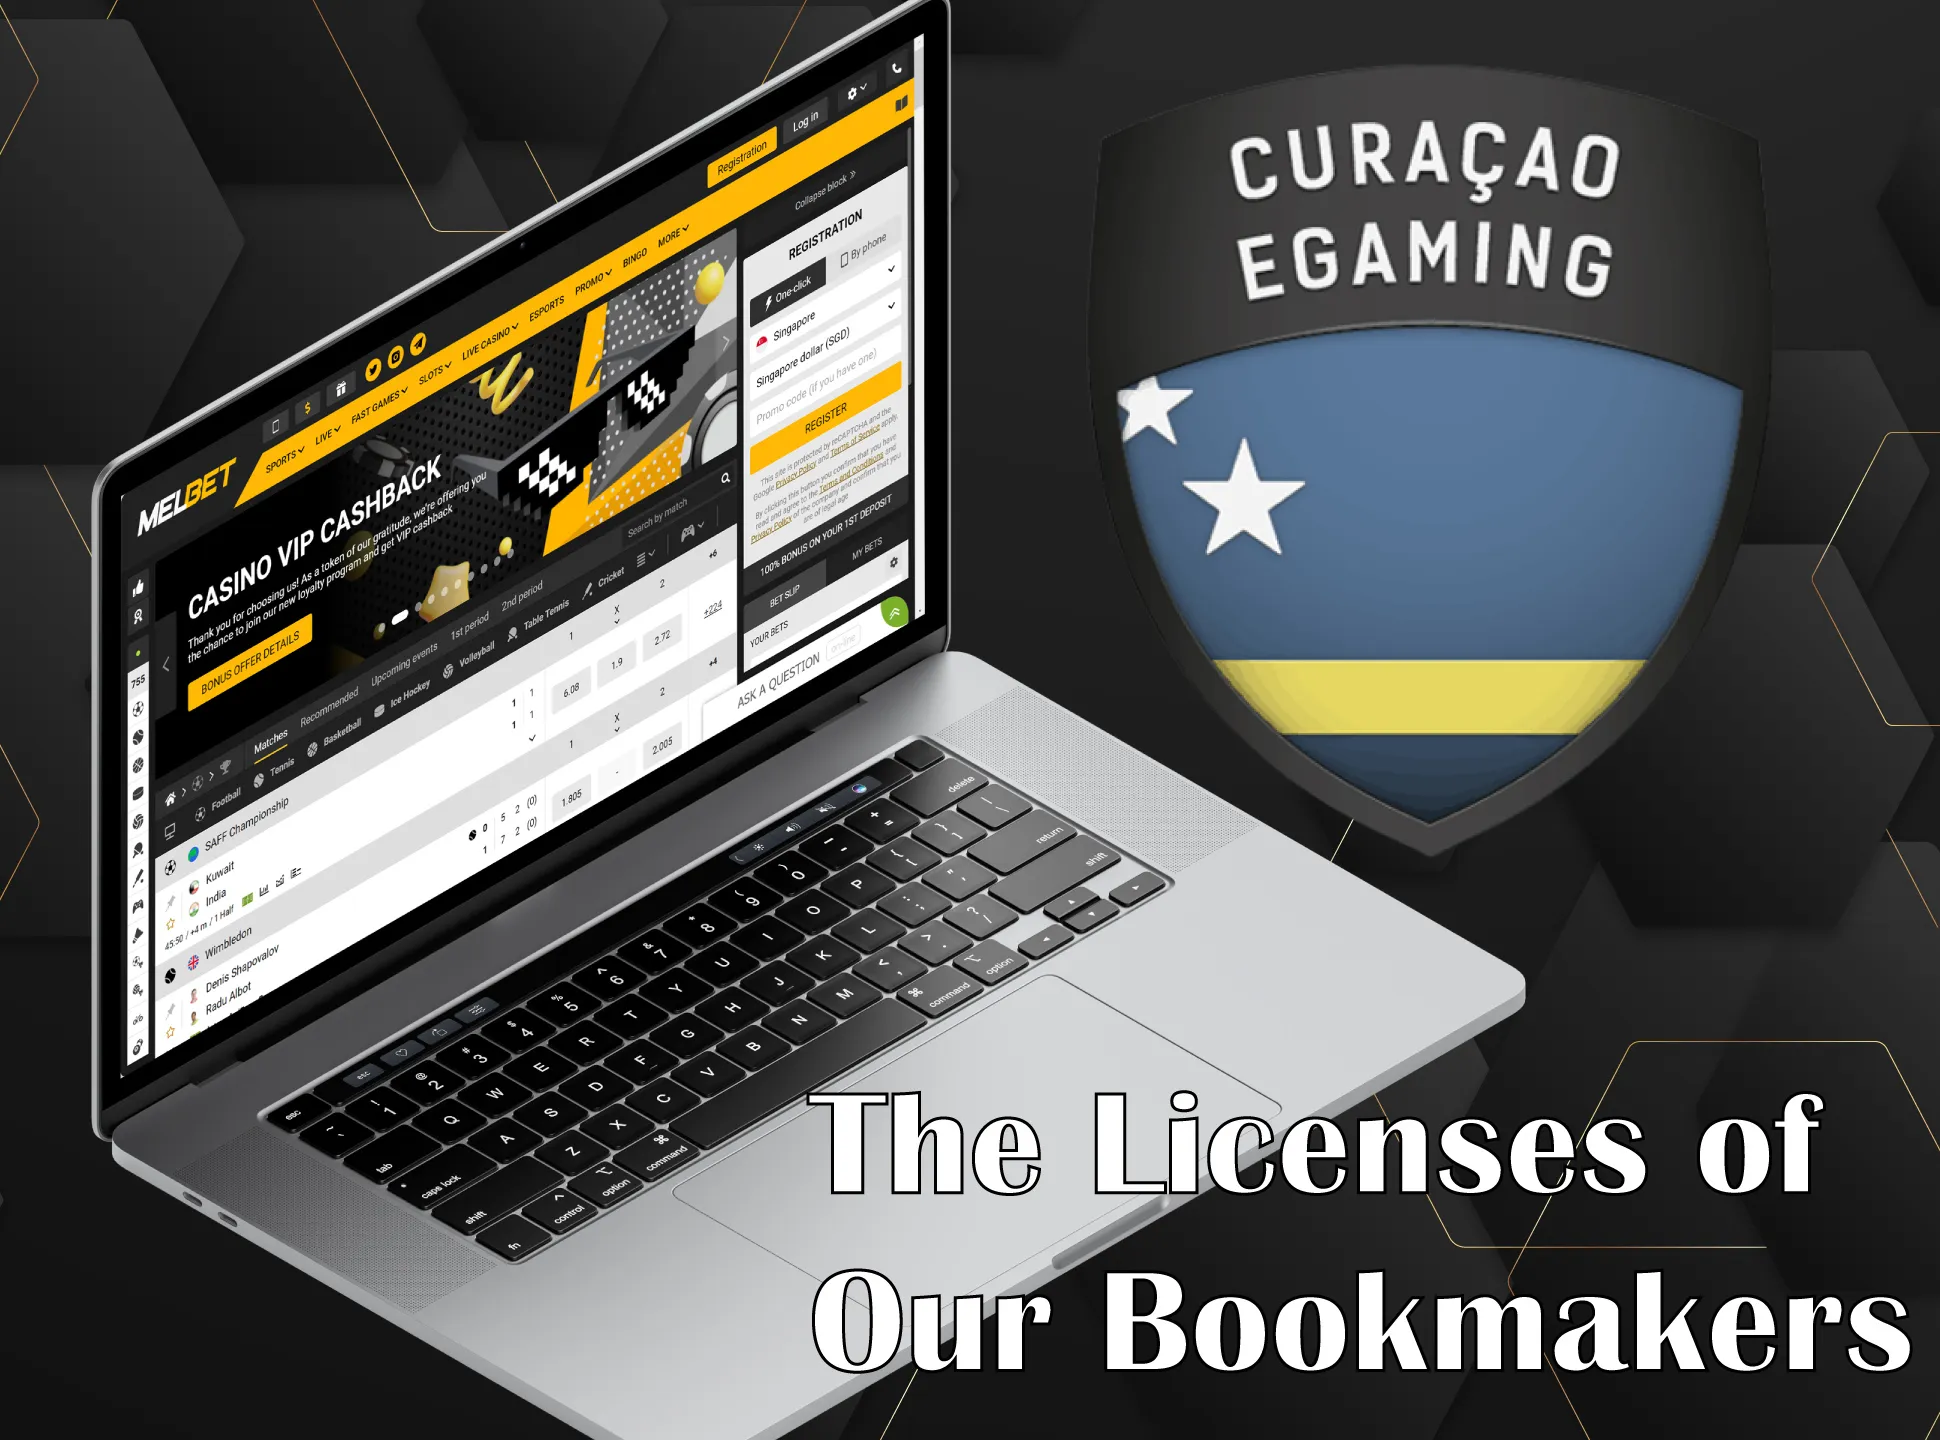 Curacao eGaming License is one of the most popular.